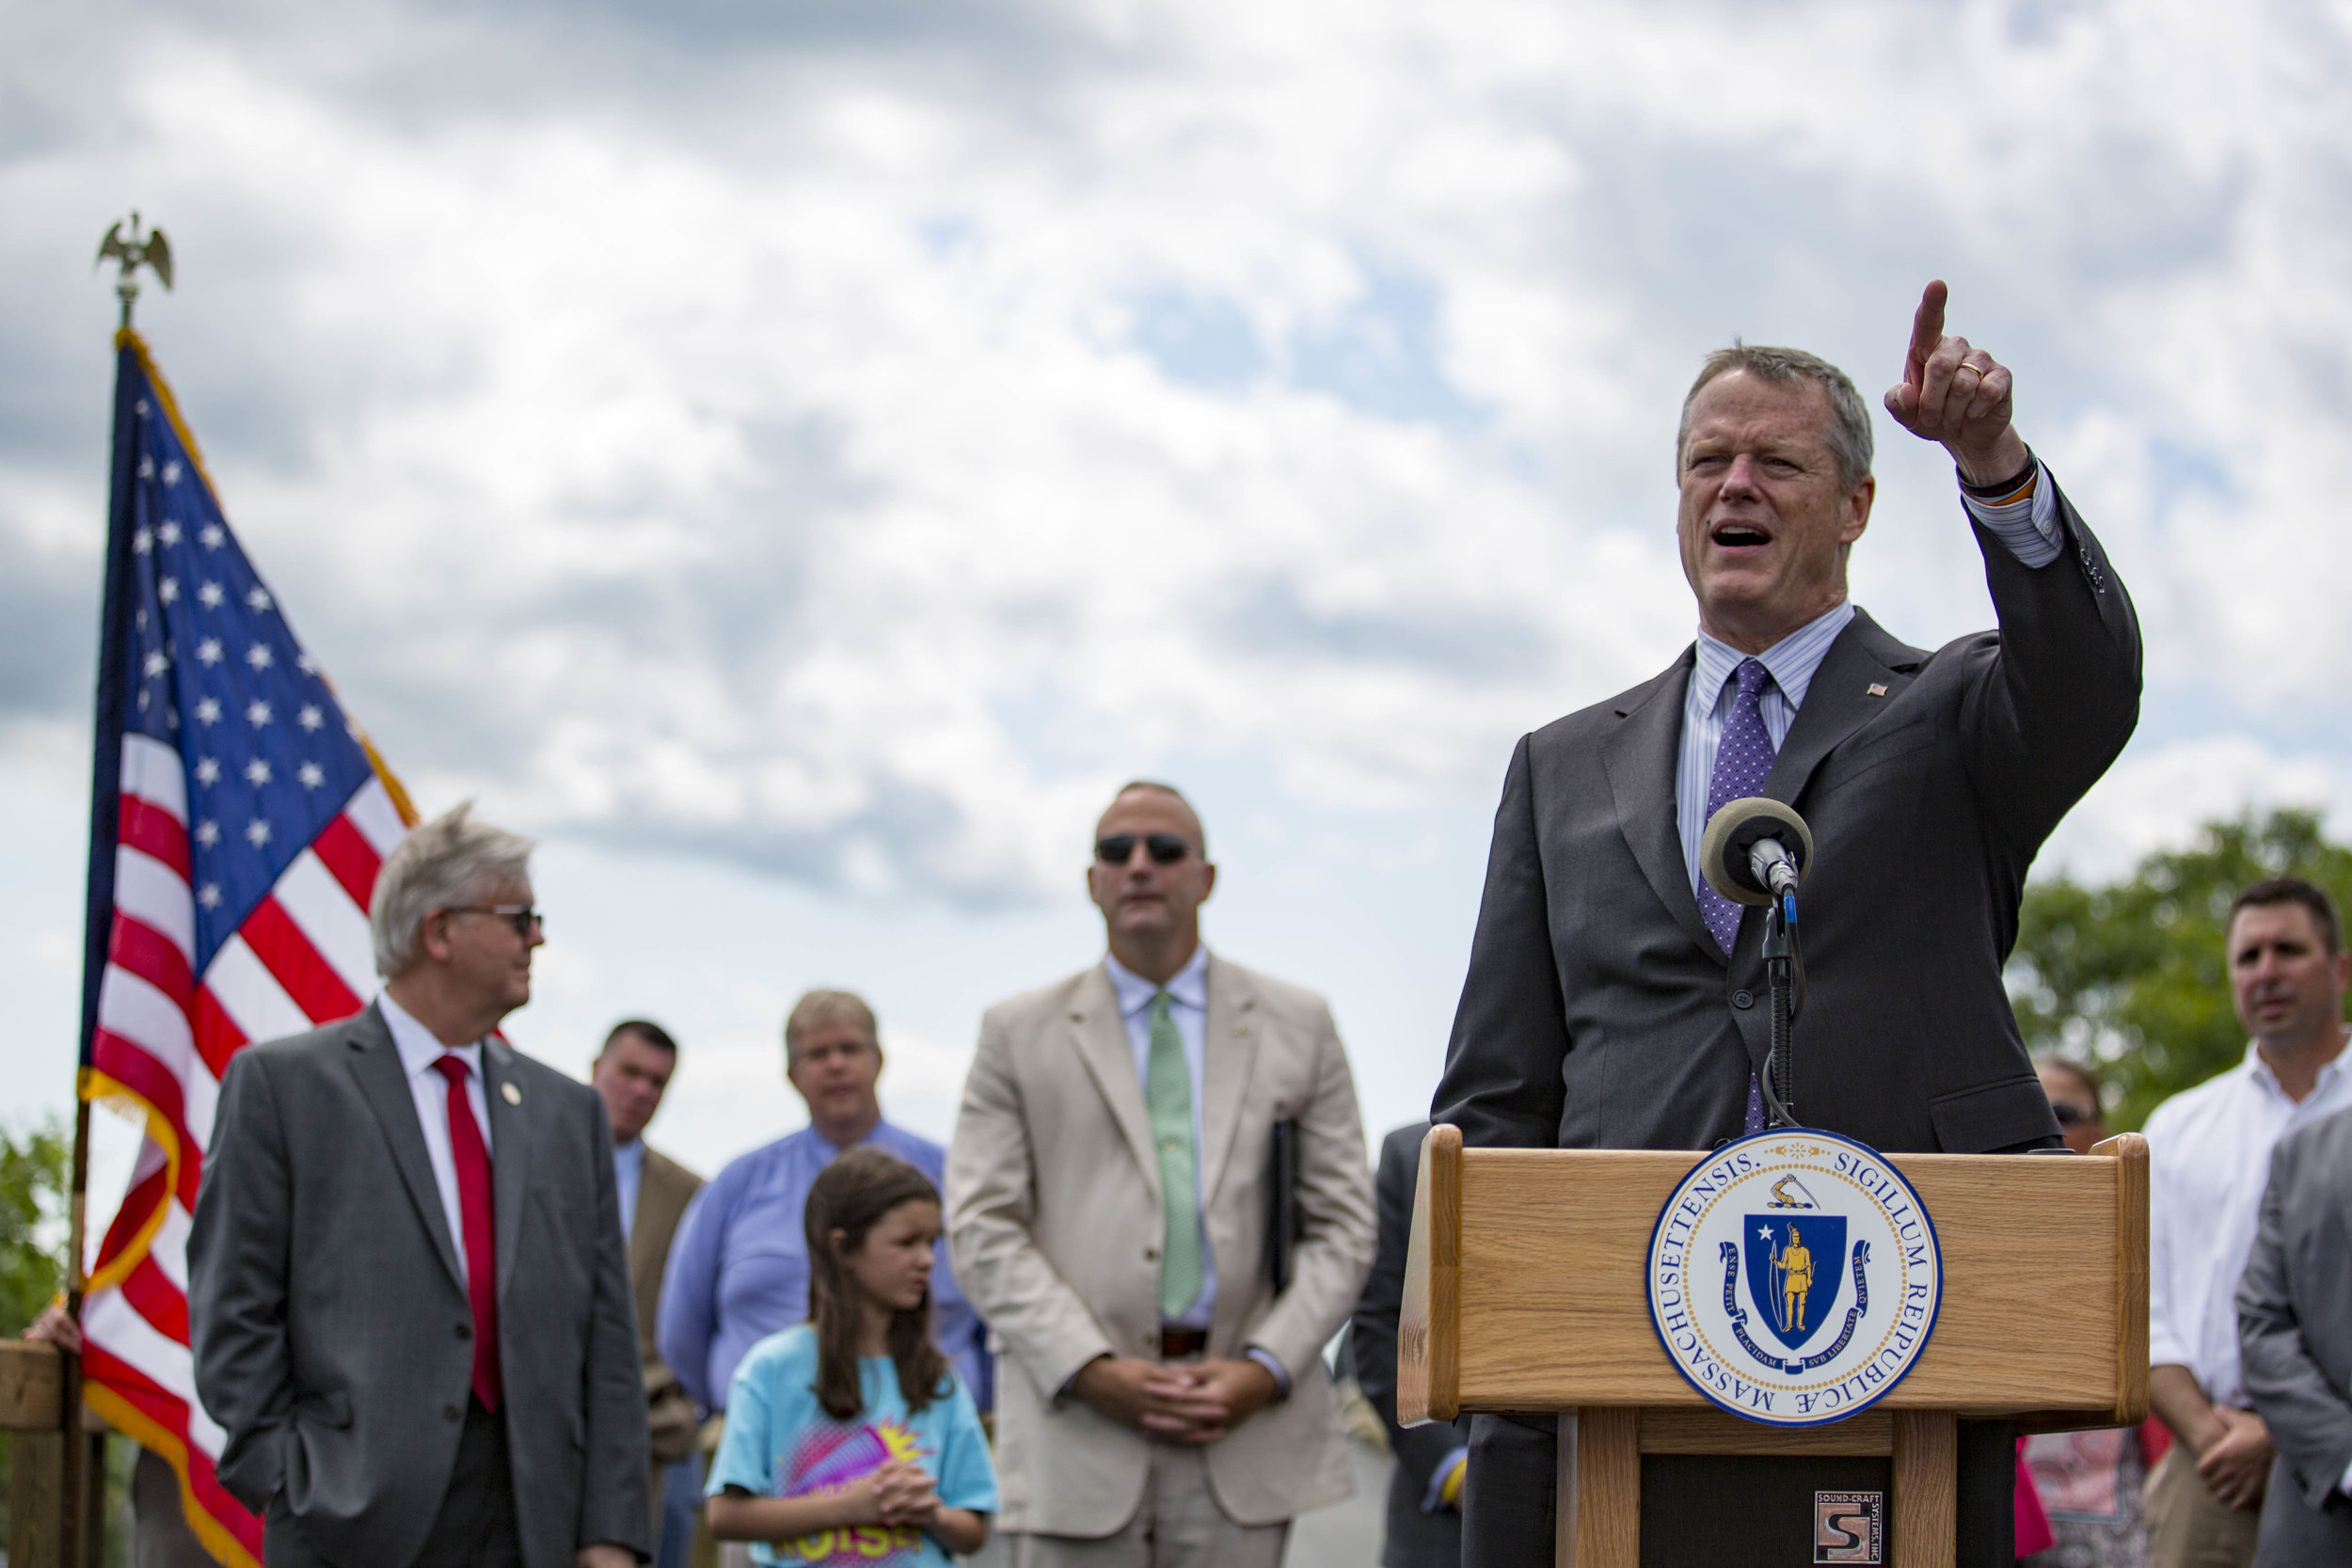  Governor Charlie Baker addresses the crowd at the opening of the Cape Cod Rail Trail extension off of route 134 in South Dennis on June 28, 2017. 